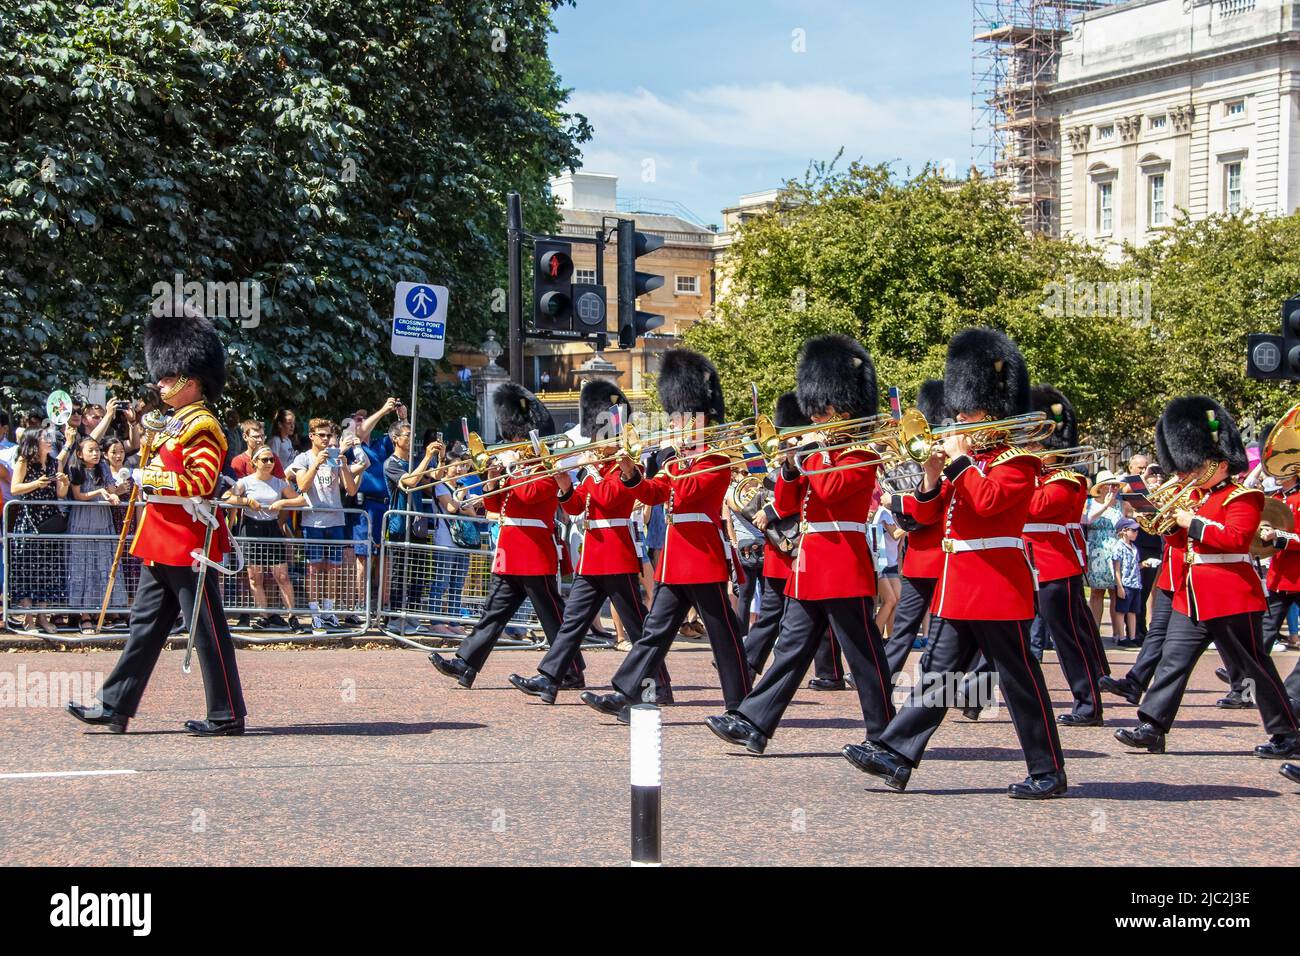 7 24 2019 London UK - British soldiers marching with trombones and trumpets during Changing of the Guard with tourists crowded at side of street watch Stock Photo